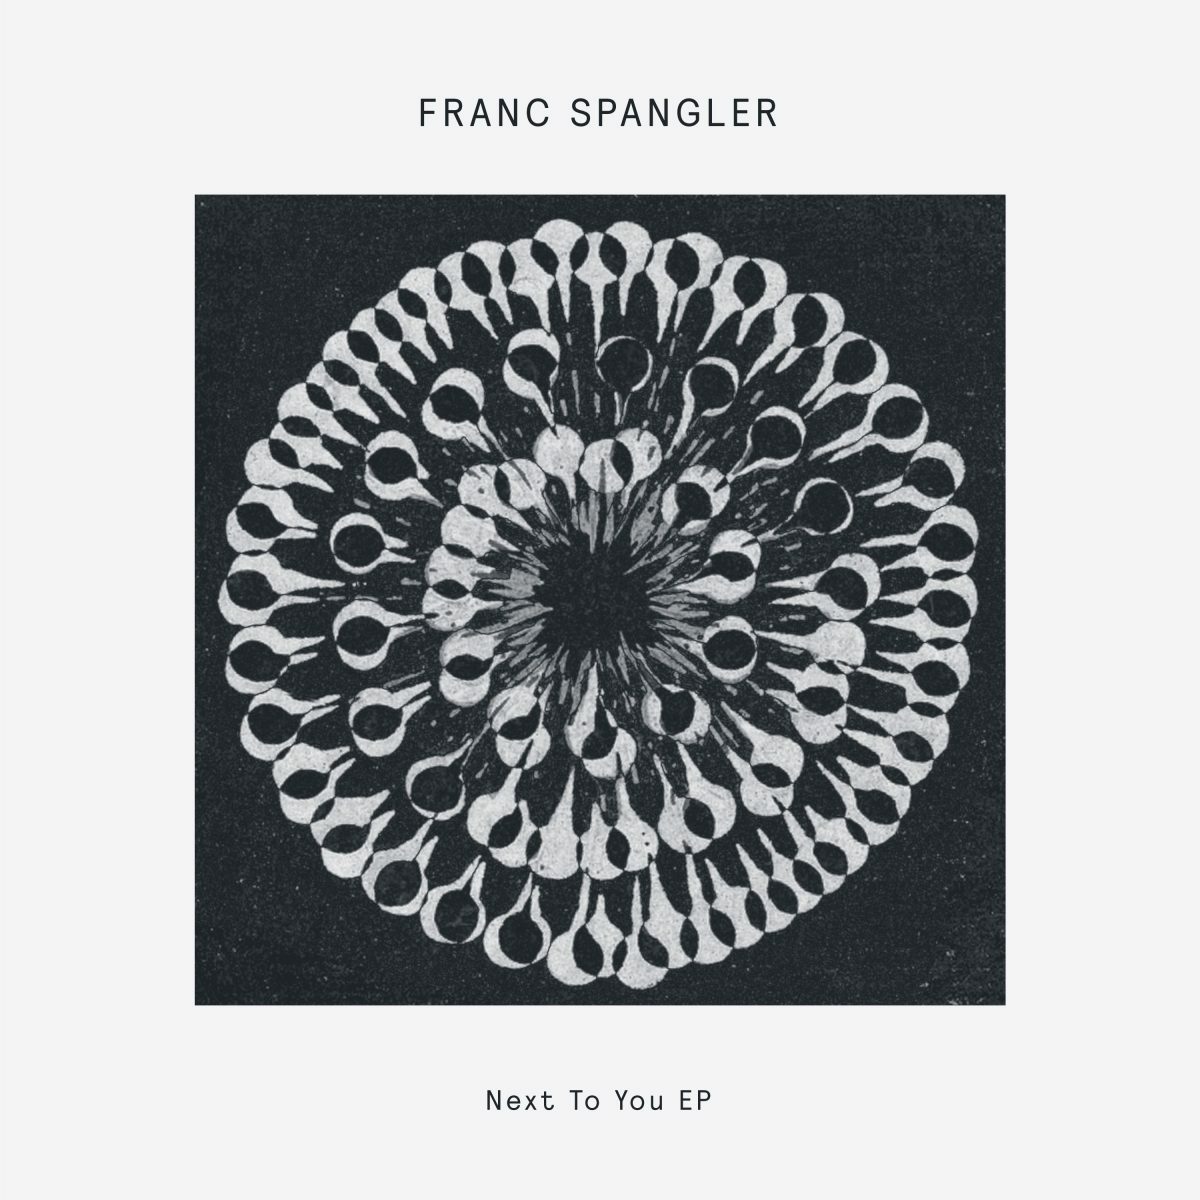 Franc Spangler – Next To You EP (Delusions Of Grandeur)